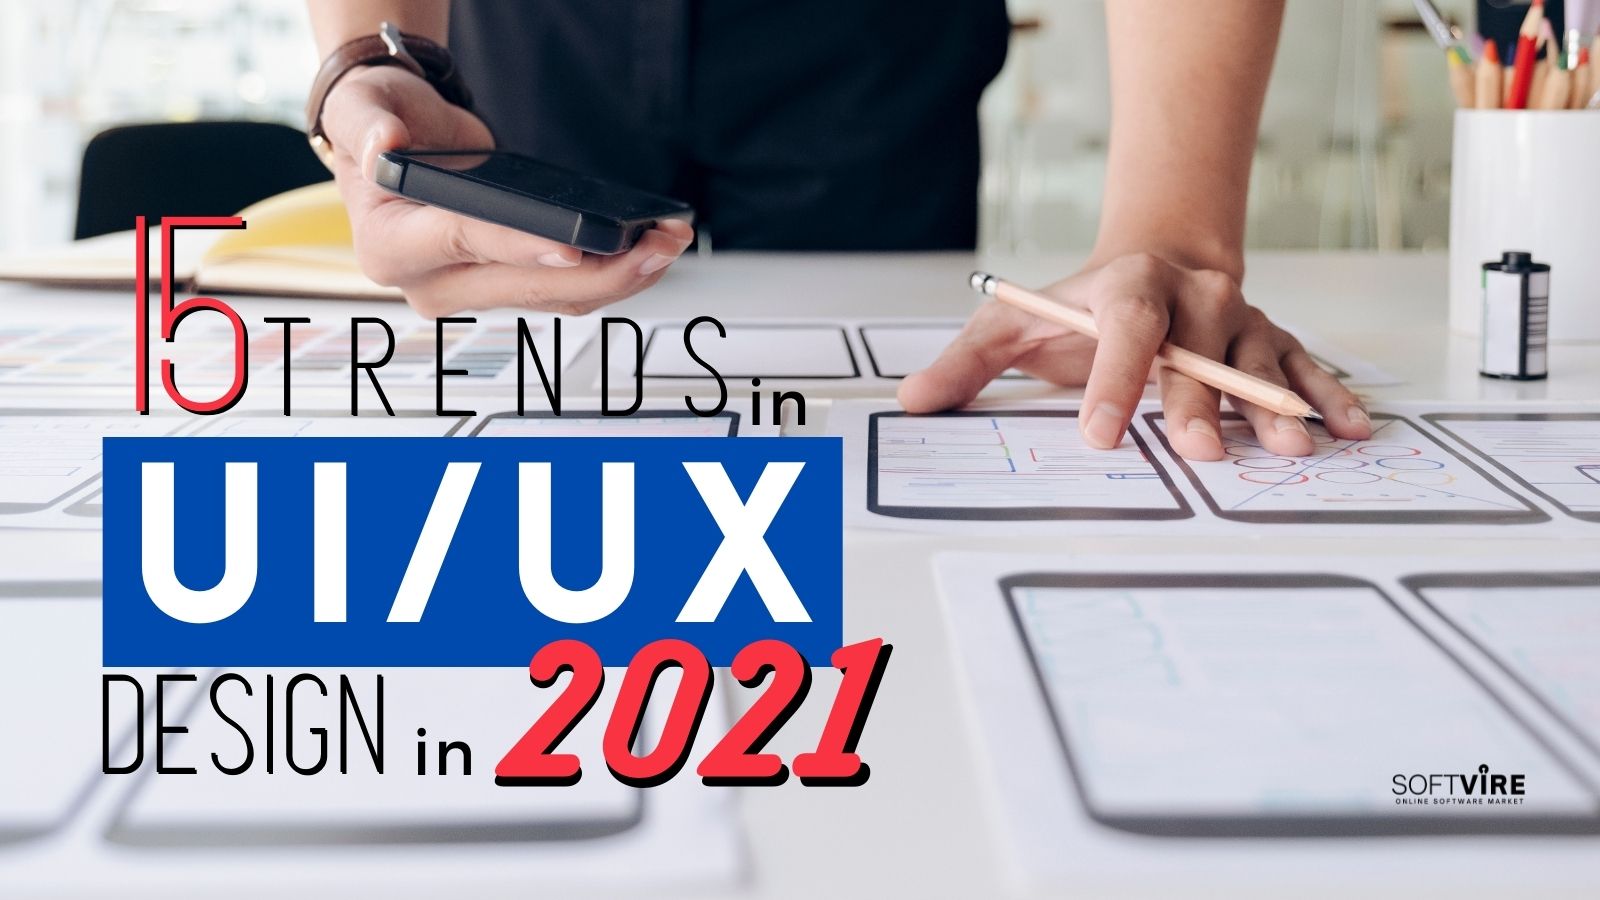 15 Trends in UI_UX Design to Apply in 2021 - Twitter Softvire Global Market